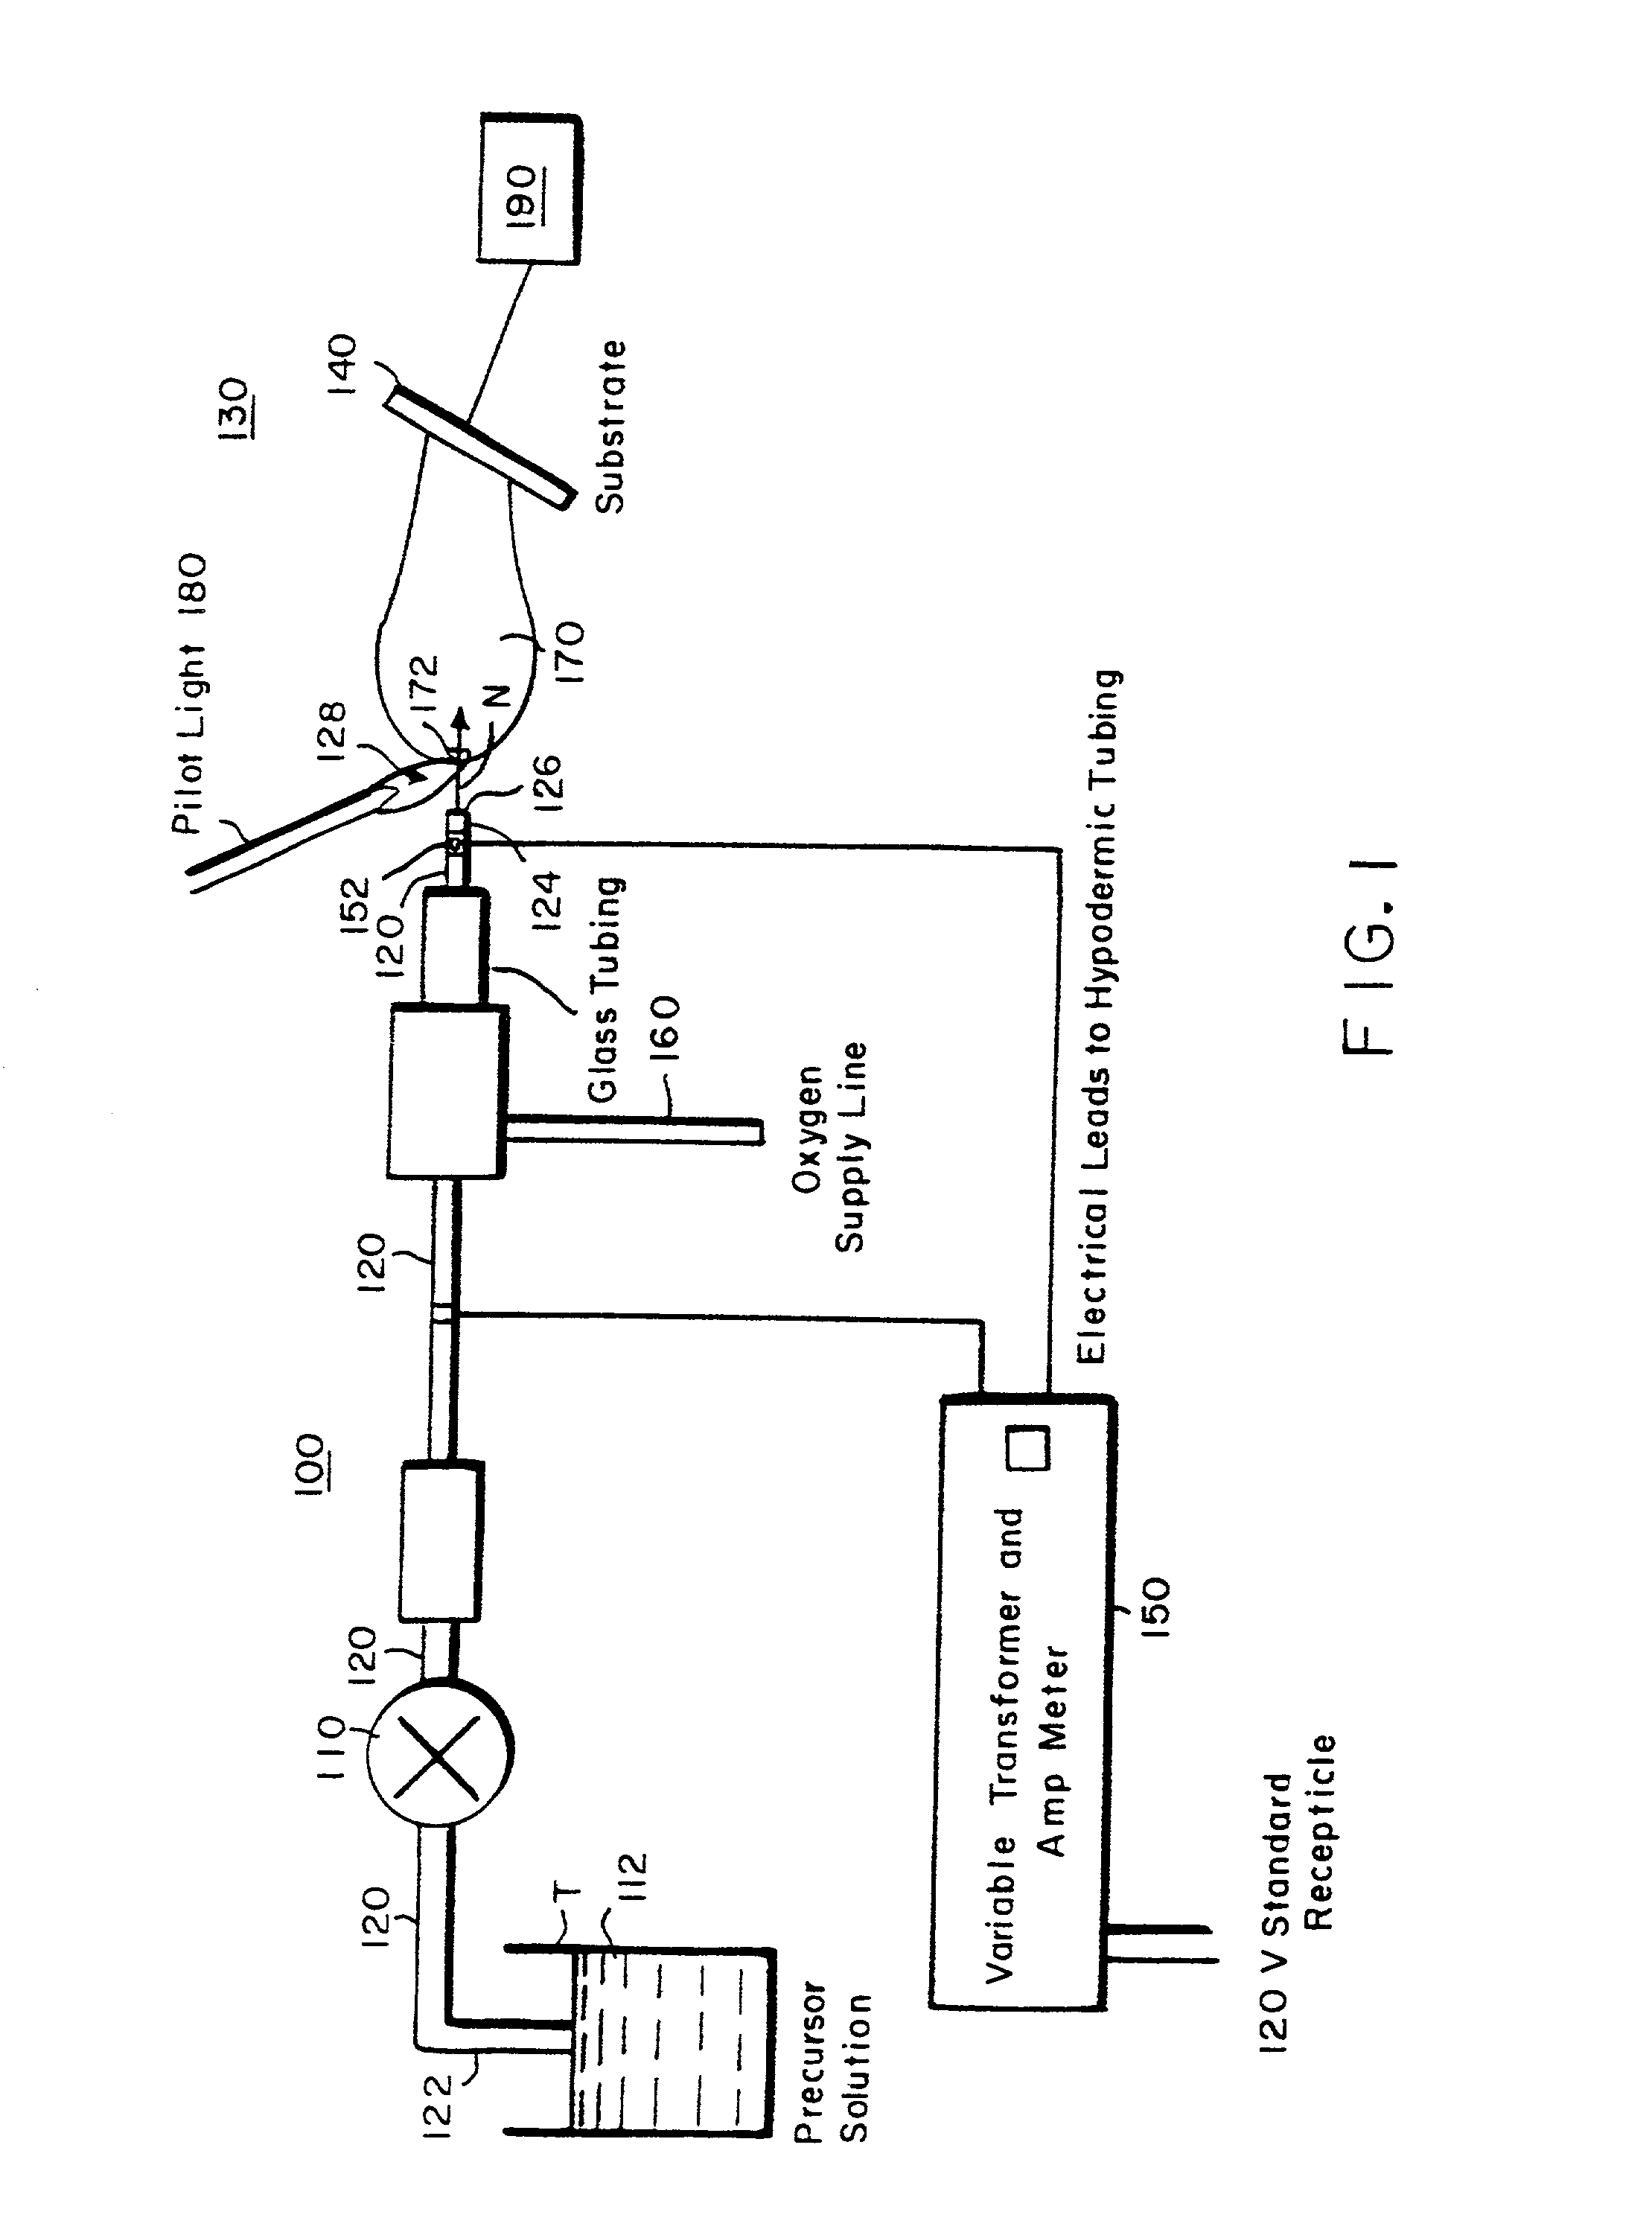 Chemical vapor deposition and powder formation using thermal spray